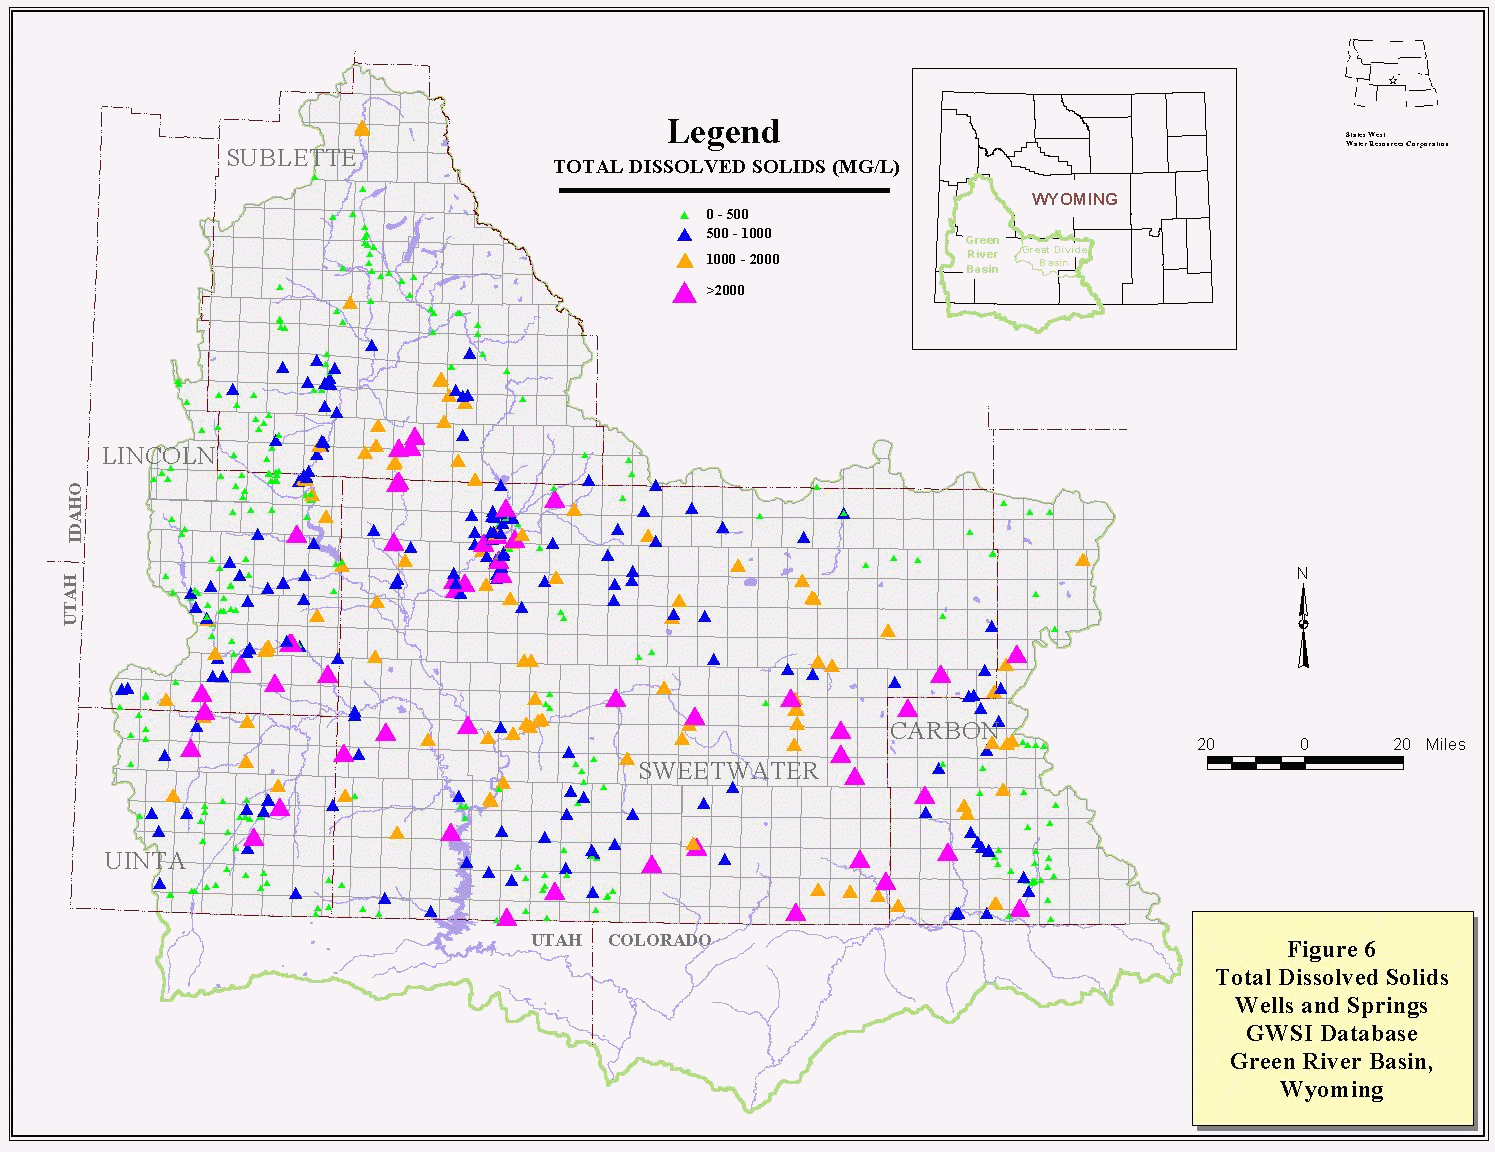 Total Dissolved Solids Wells and Springs, GWSI Database, Green River Basin, Wyoming